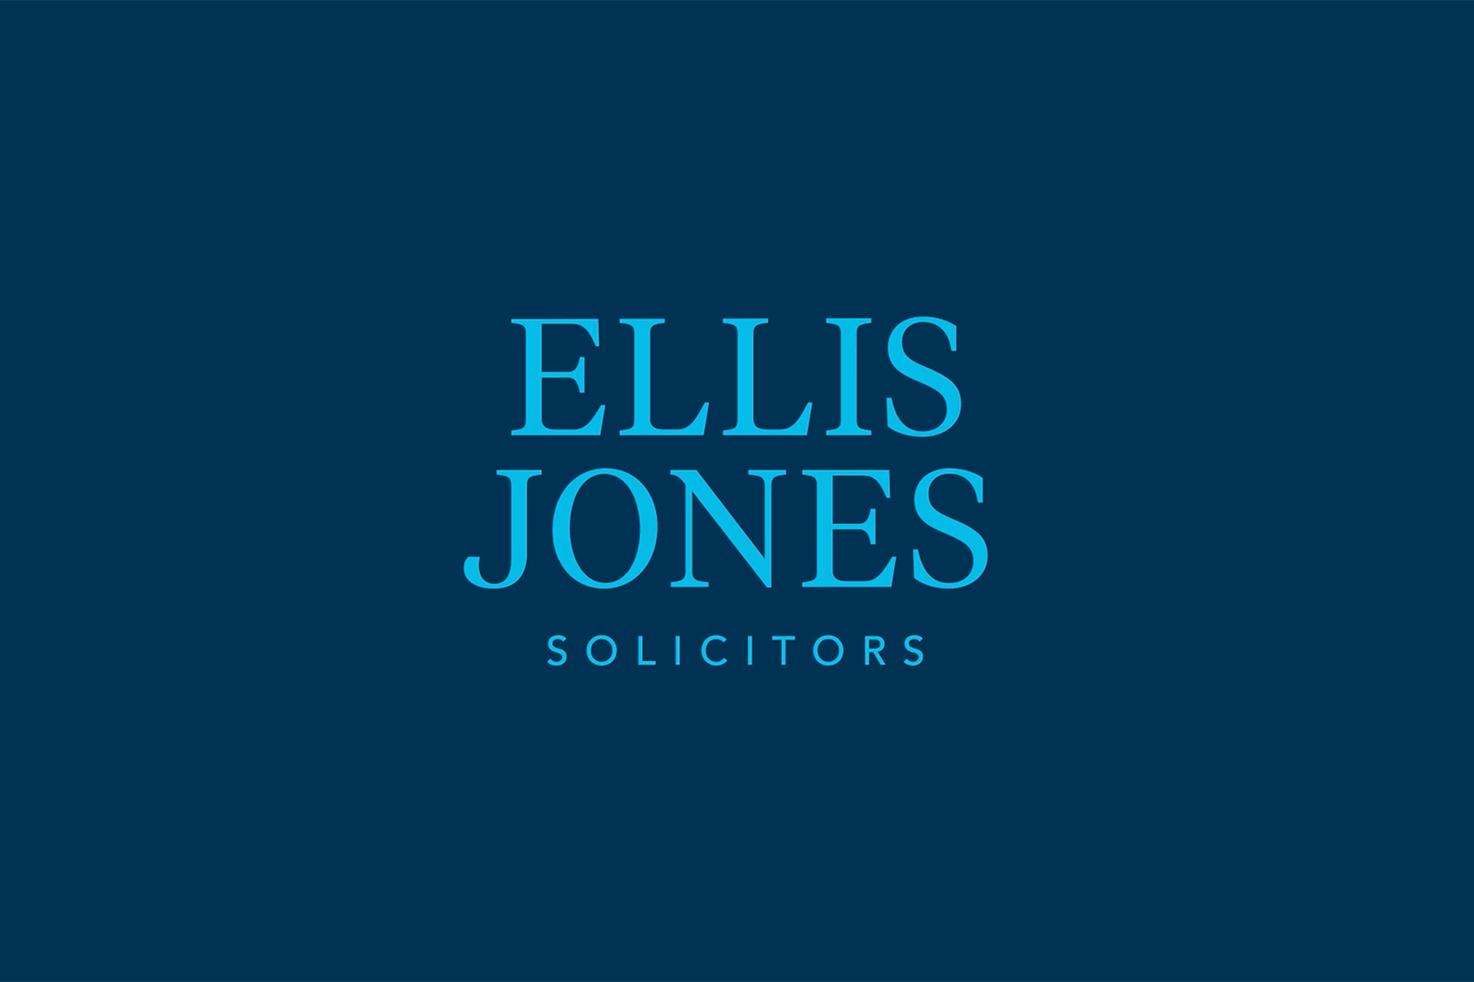 Ellis Jones Solicitors leverage video to engage the charity sector